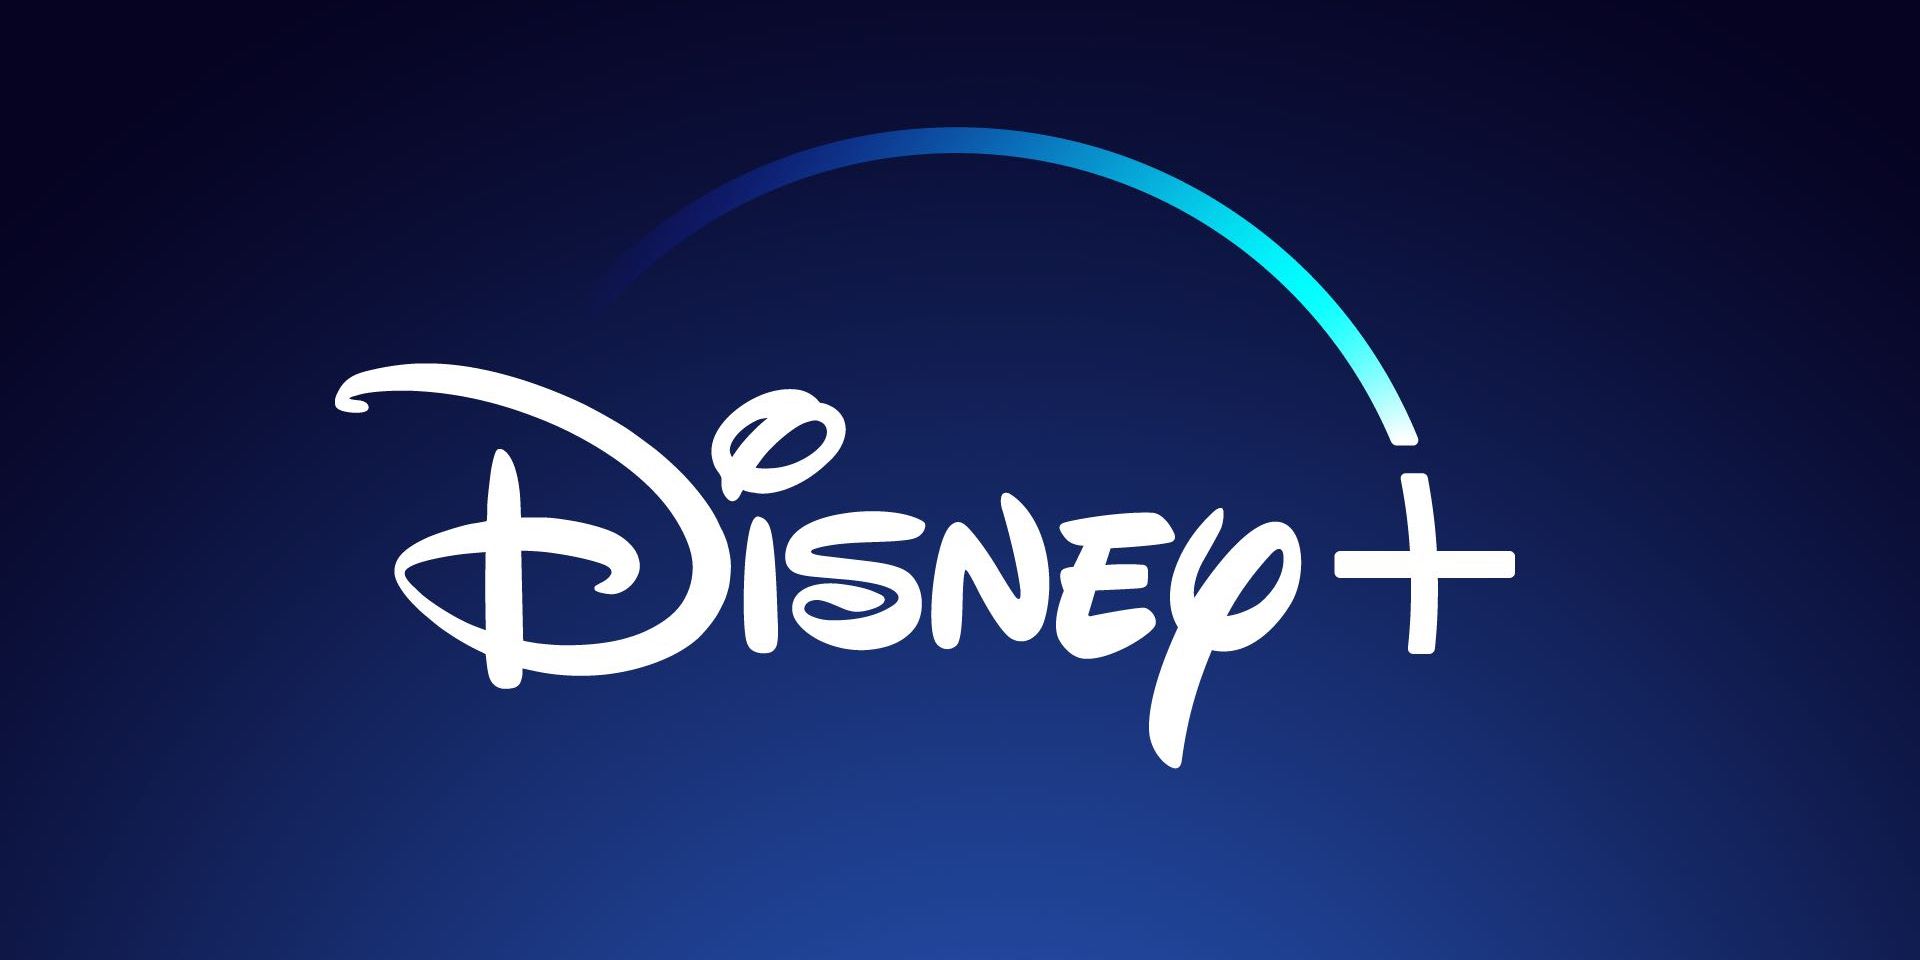 Disney+: Every New Movie & TV Show Coming In December 2020